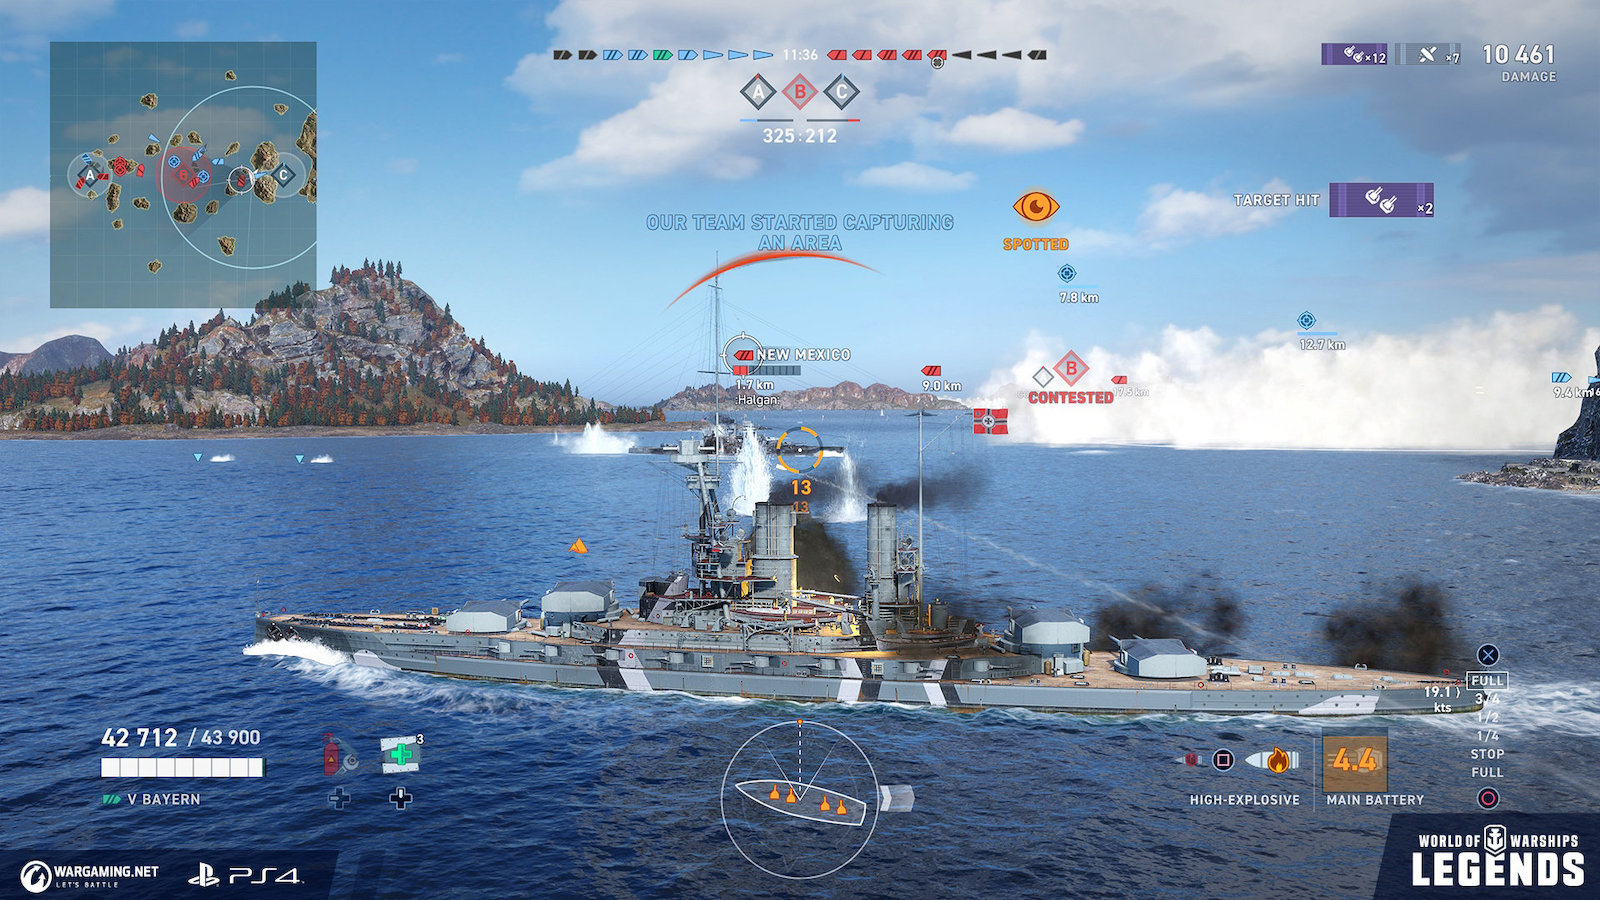 ps4 world of warships player stats